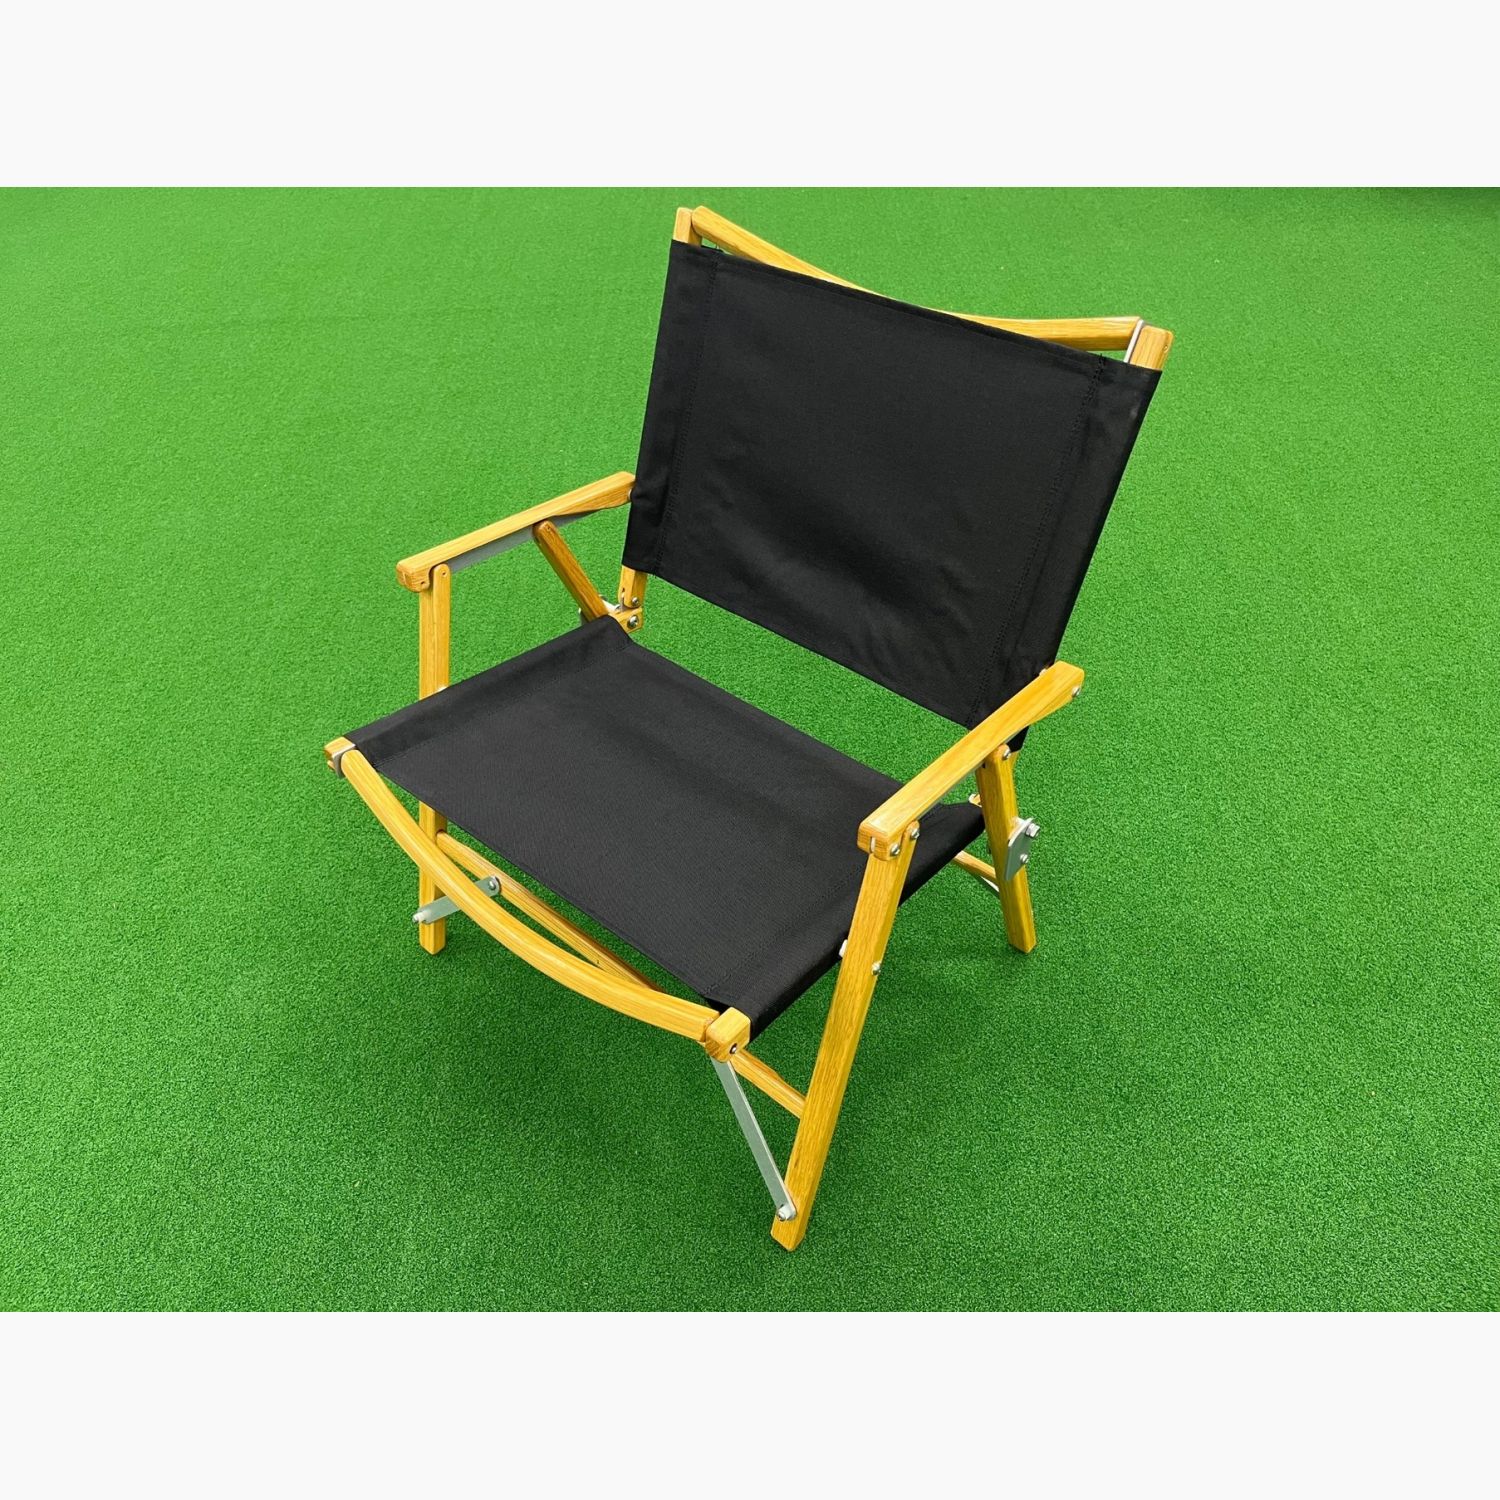 Kermit chair (カーミットチェア) カーミットチェア オーク ブラック